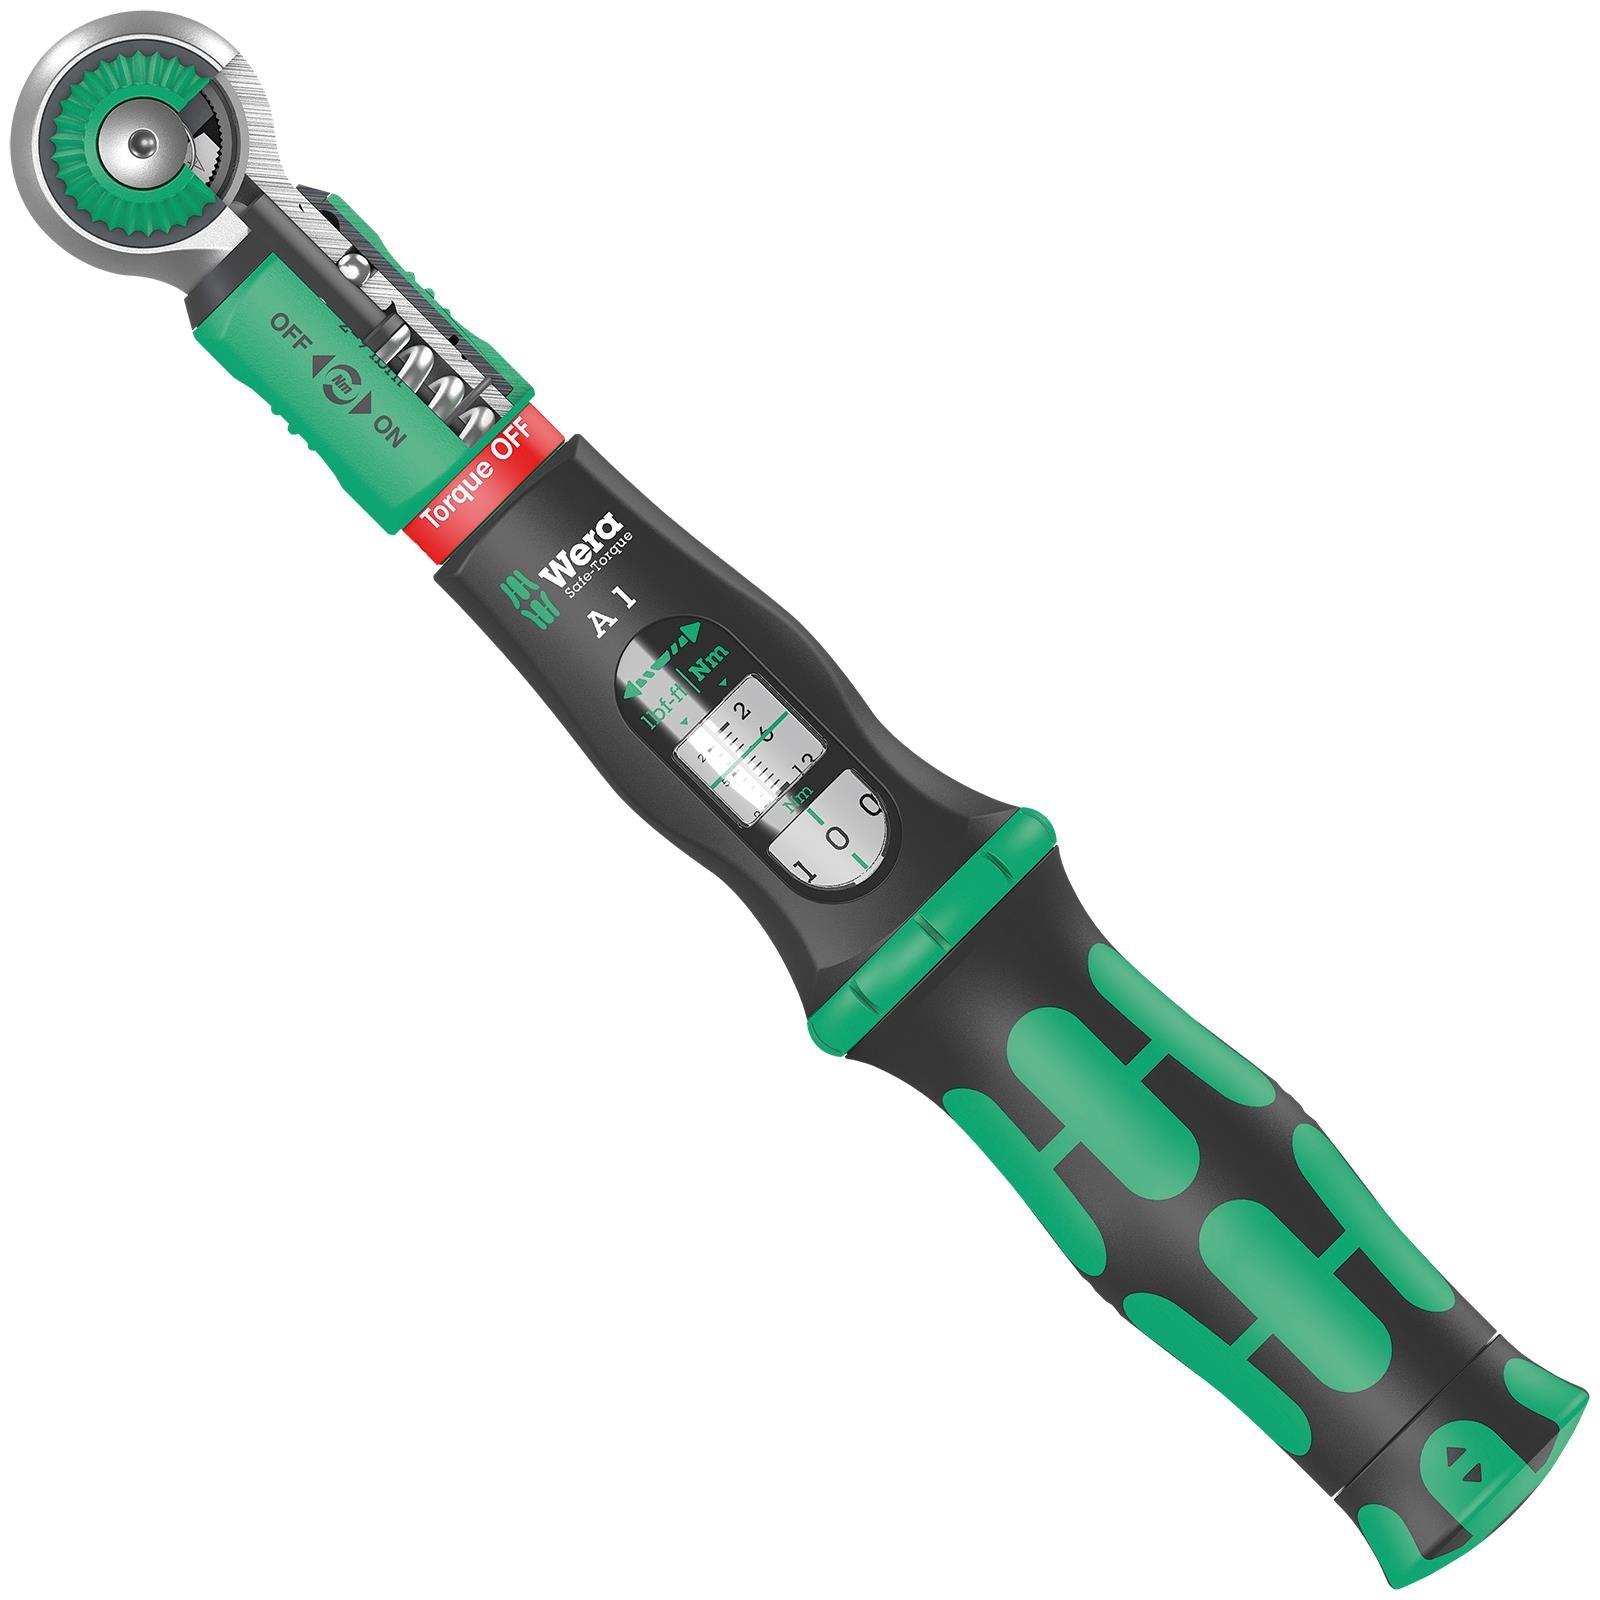 Wera Torque Wrench Safe-Torque A 1 1/4" Drive 2-12 Nm Reversible